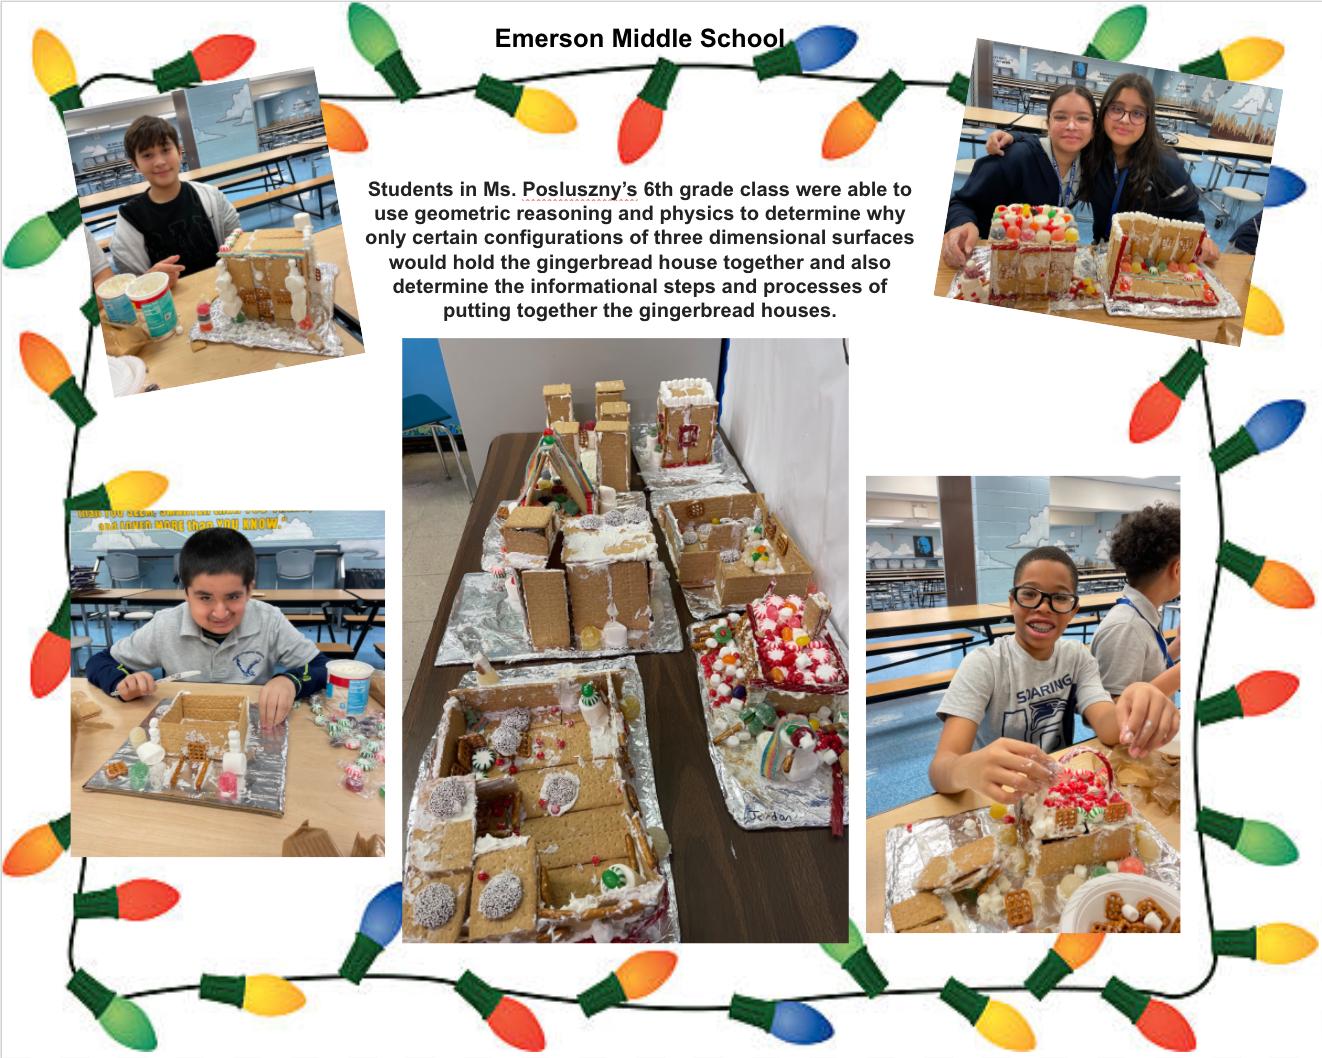 Designing gingerbread houses at the Emerson Middle School